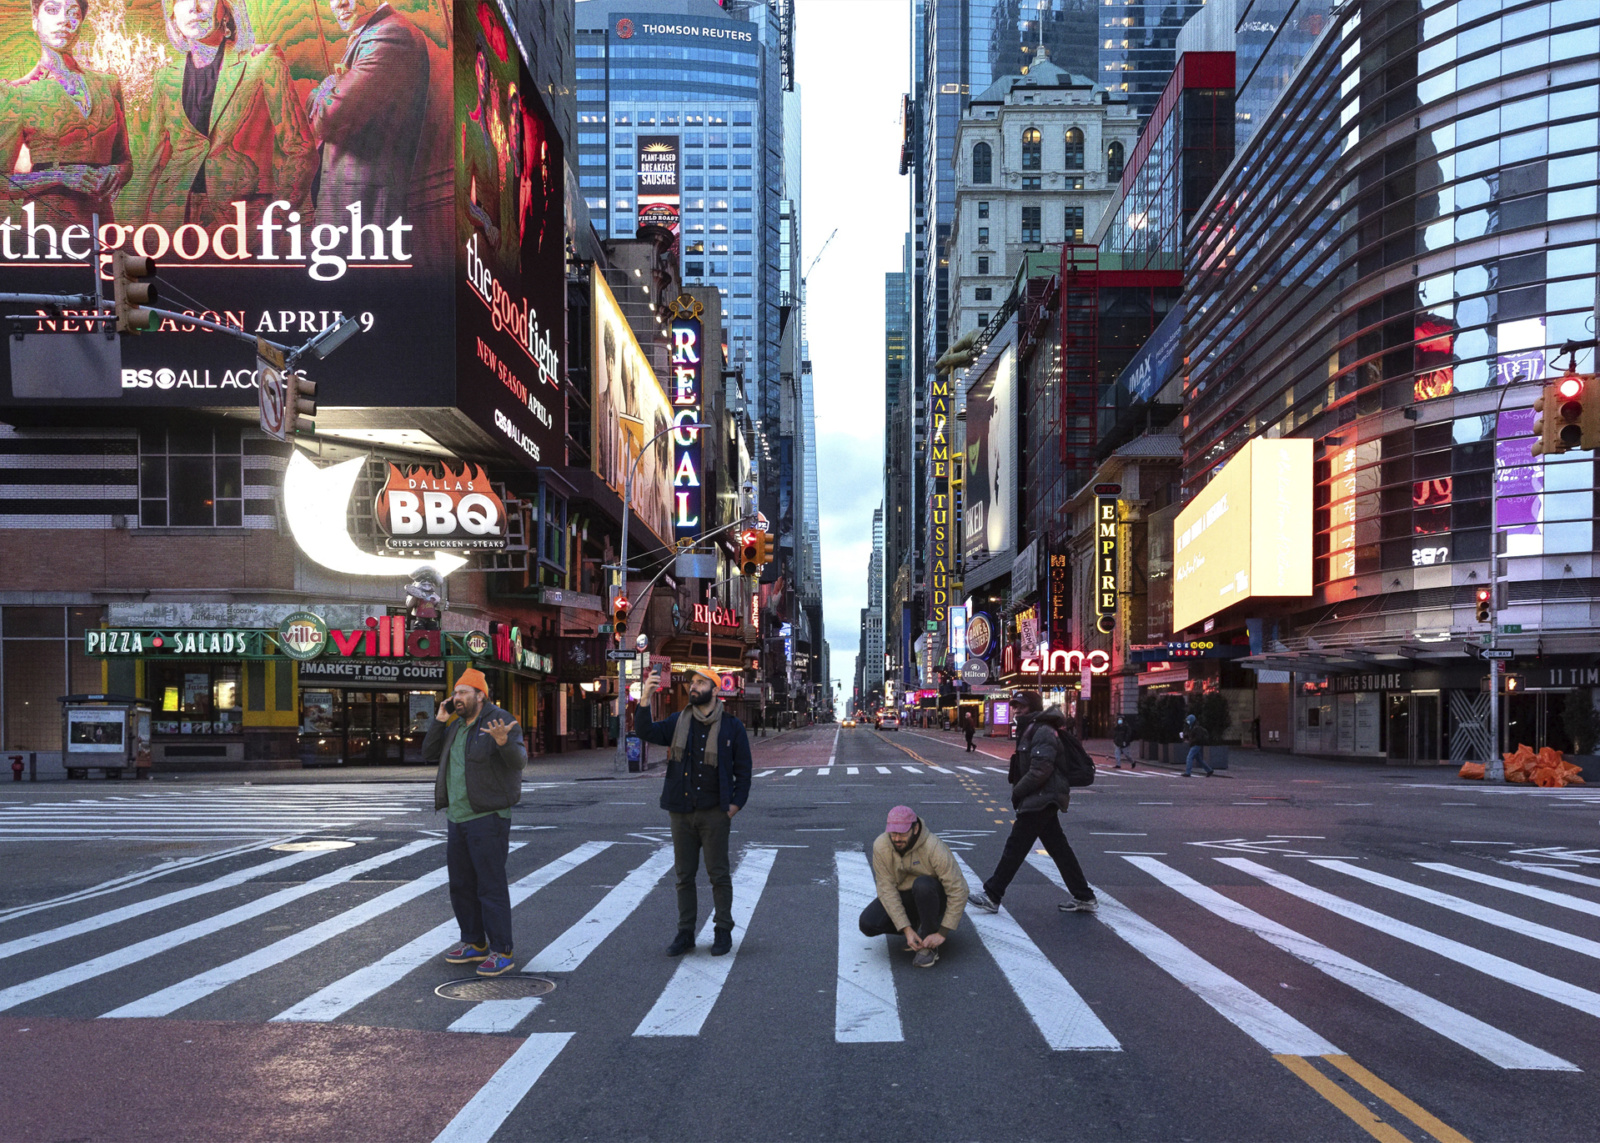 Ryan Waller, Gary Fogelson, and Phil Lubliner in Times Square, the crossroads of the world, 2021.